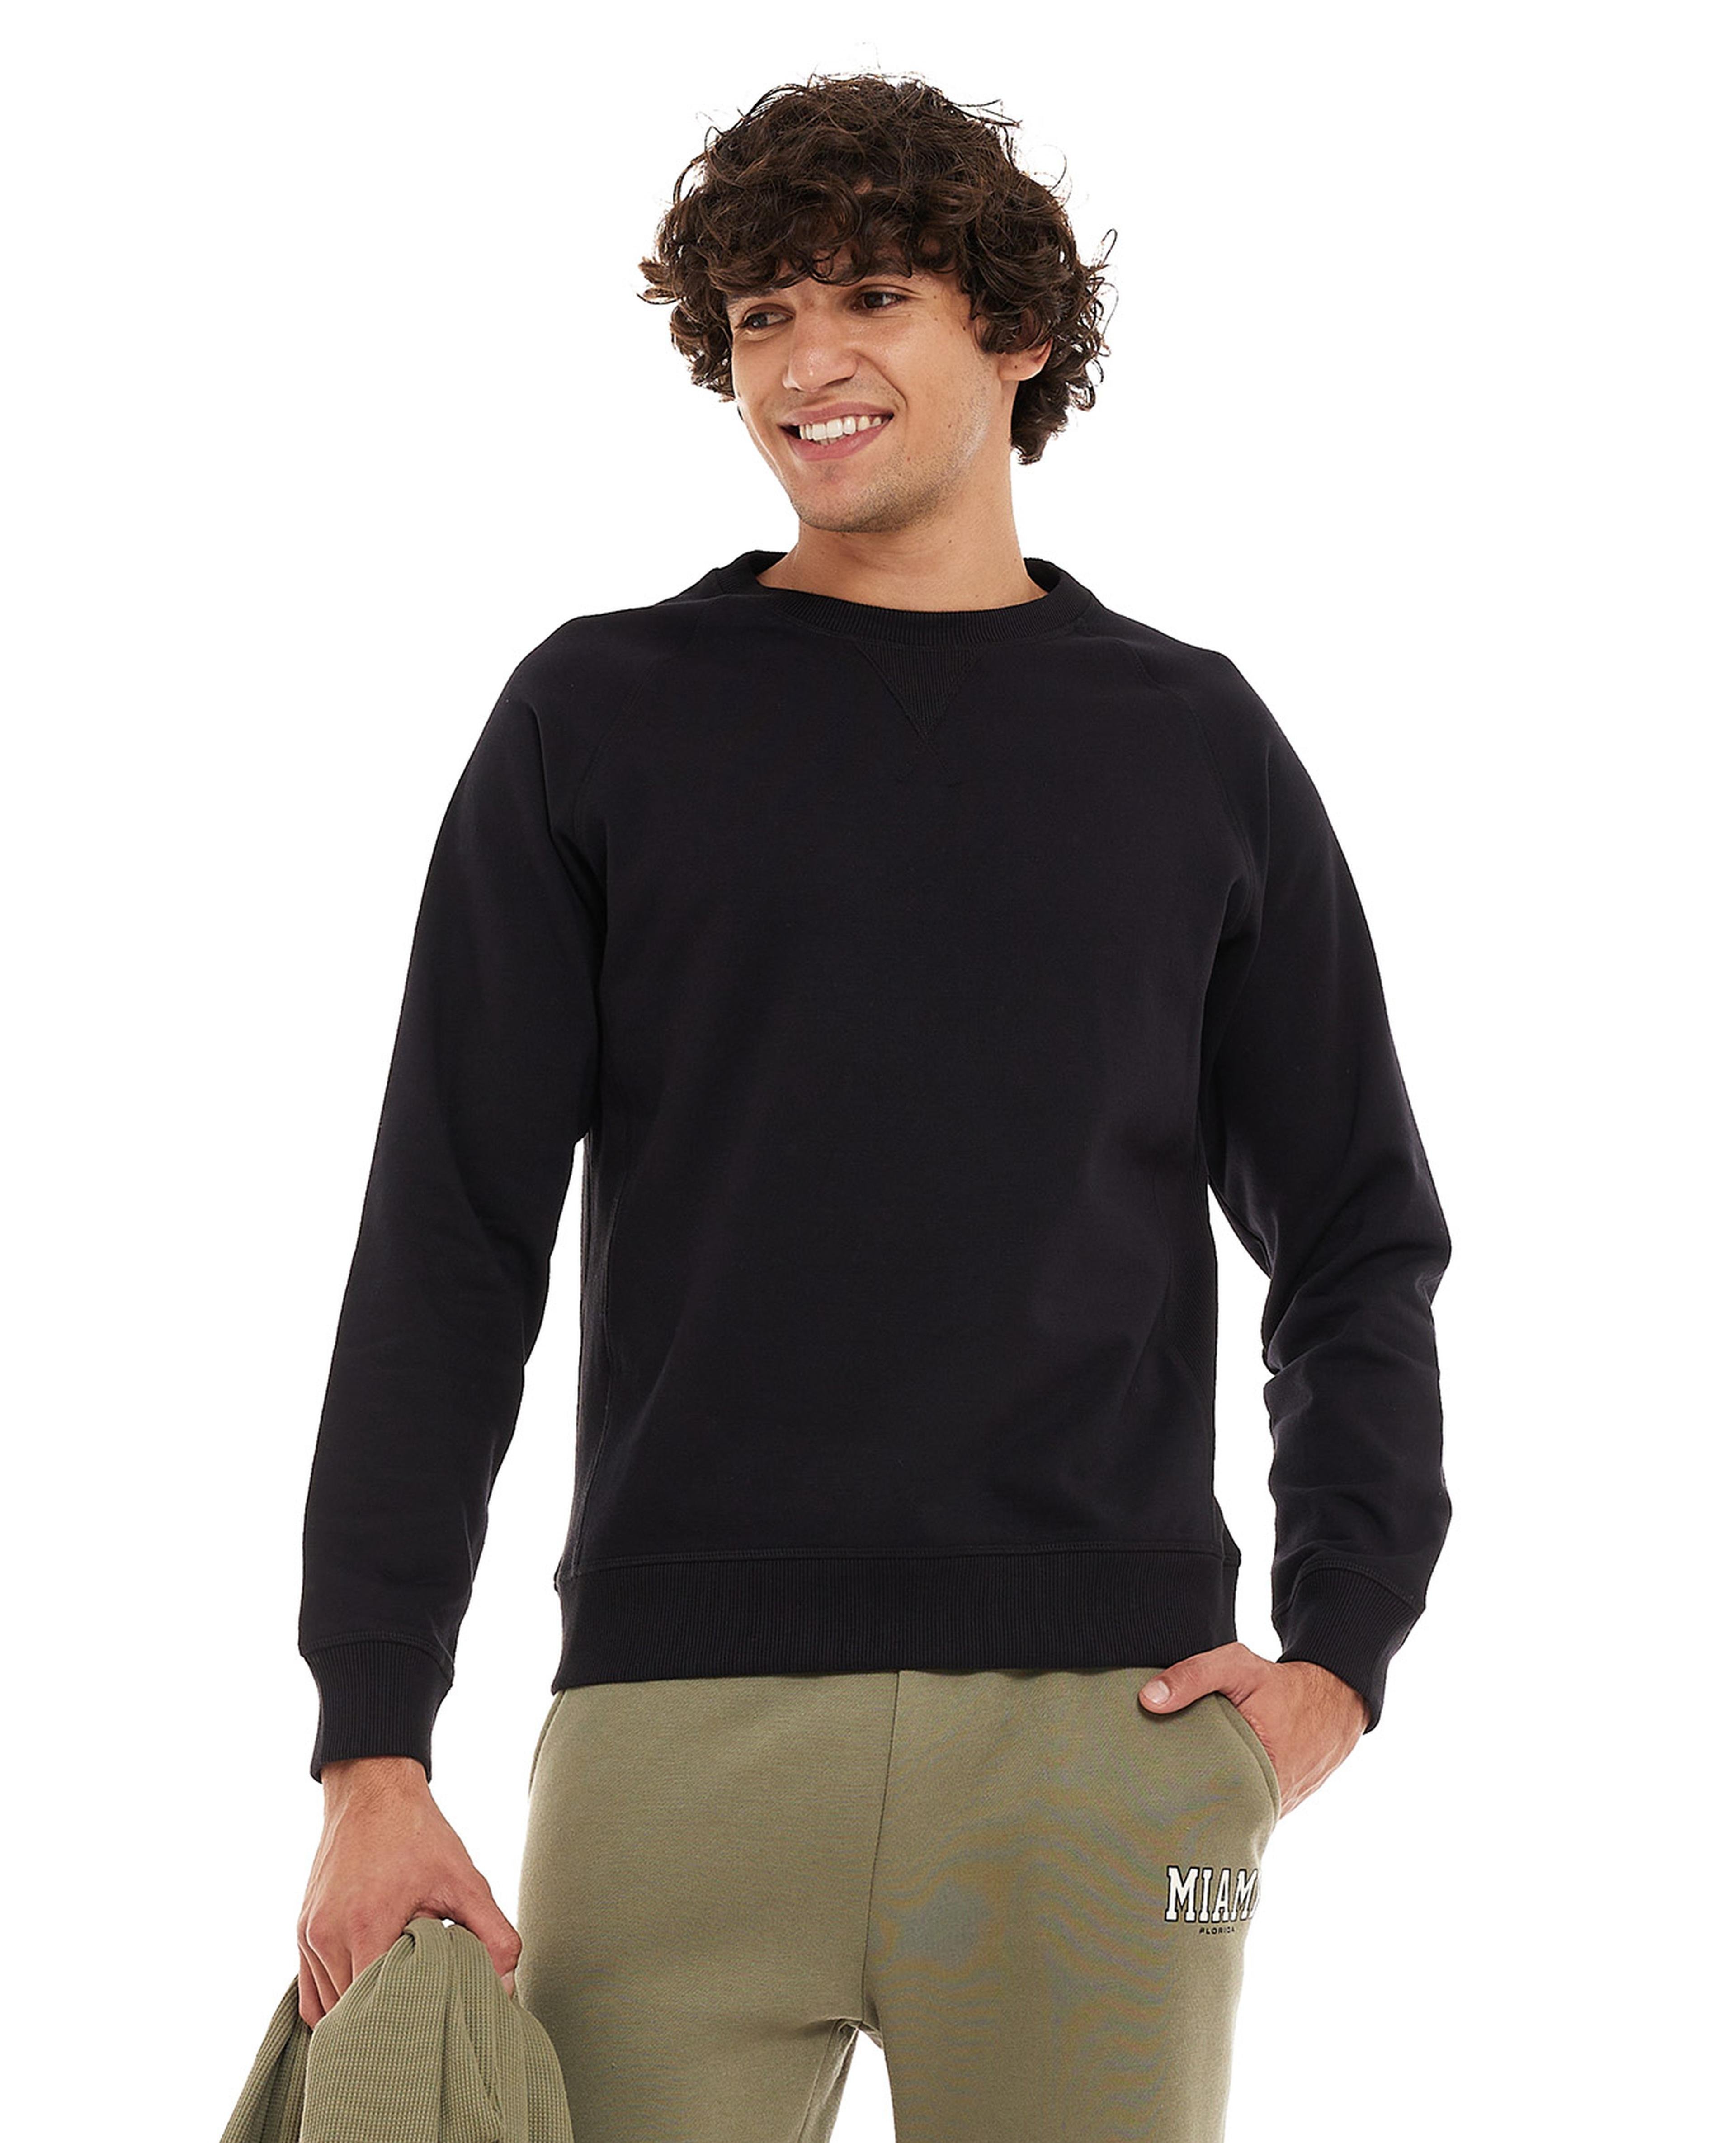 Solid Sweatshirt with Crew Neck and Long Sleeves